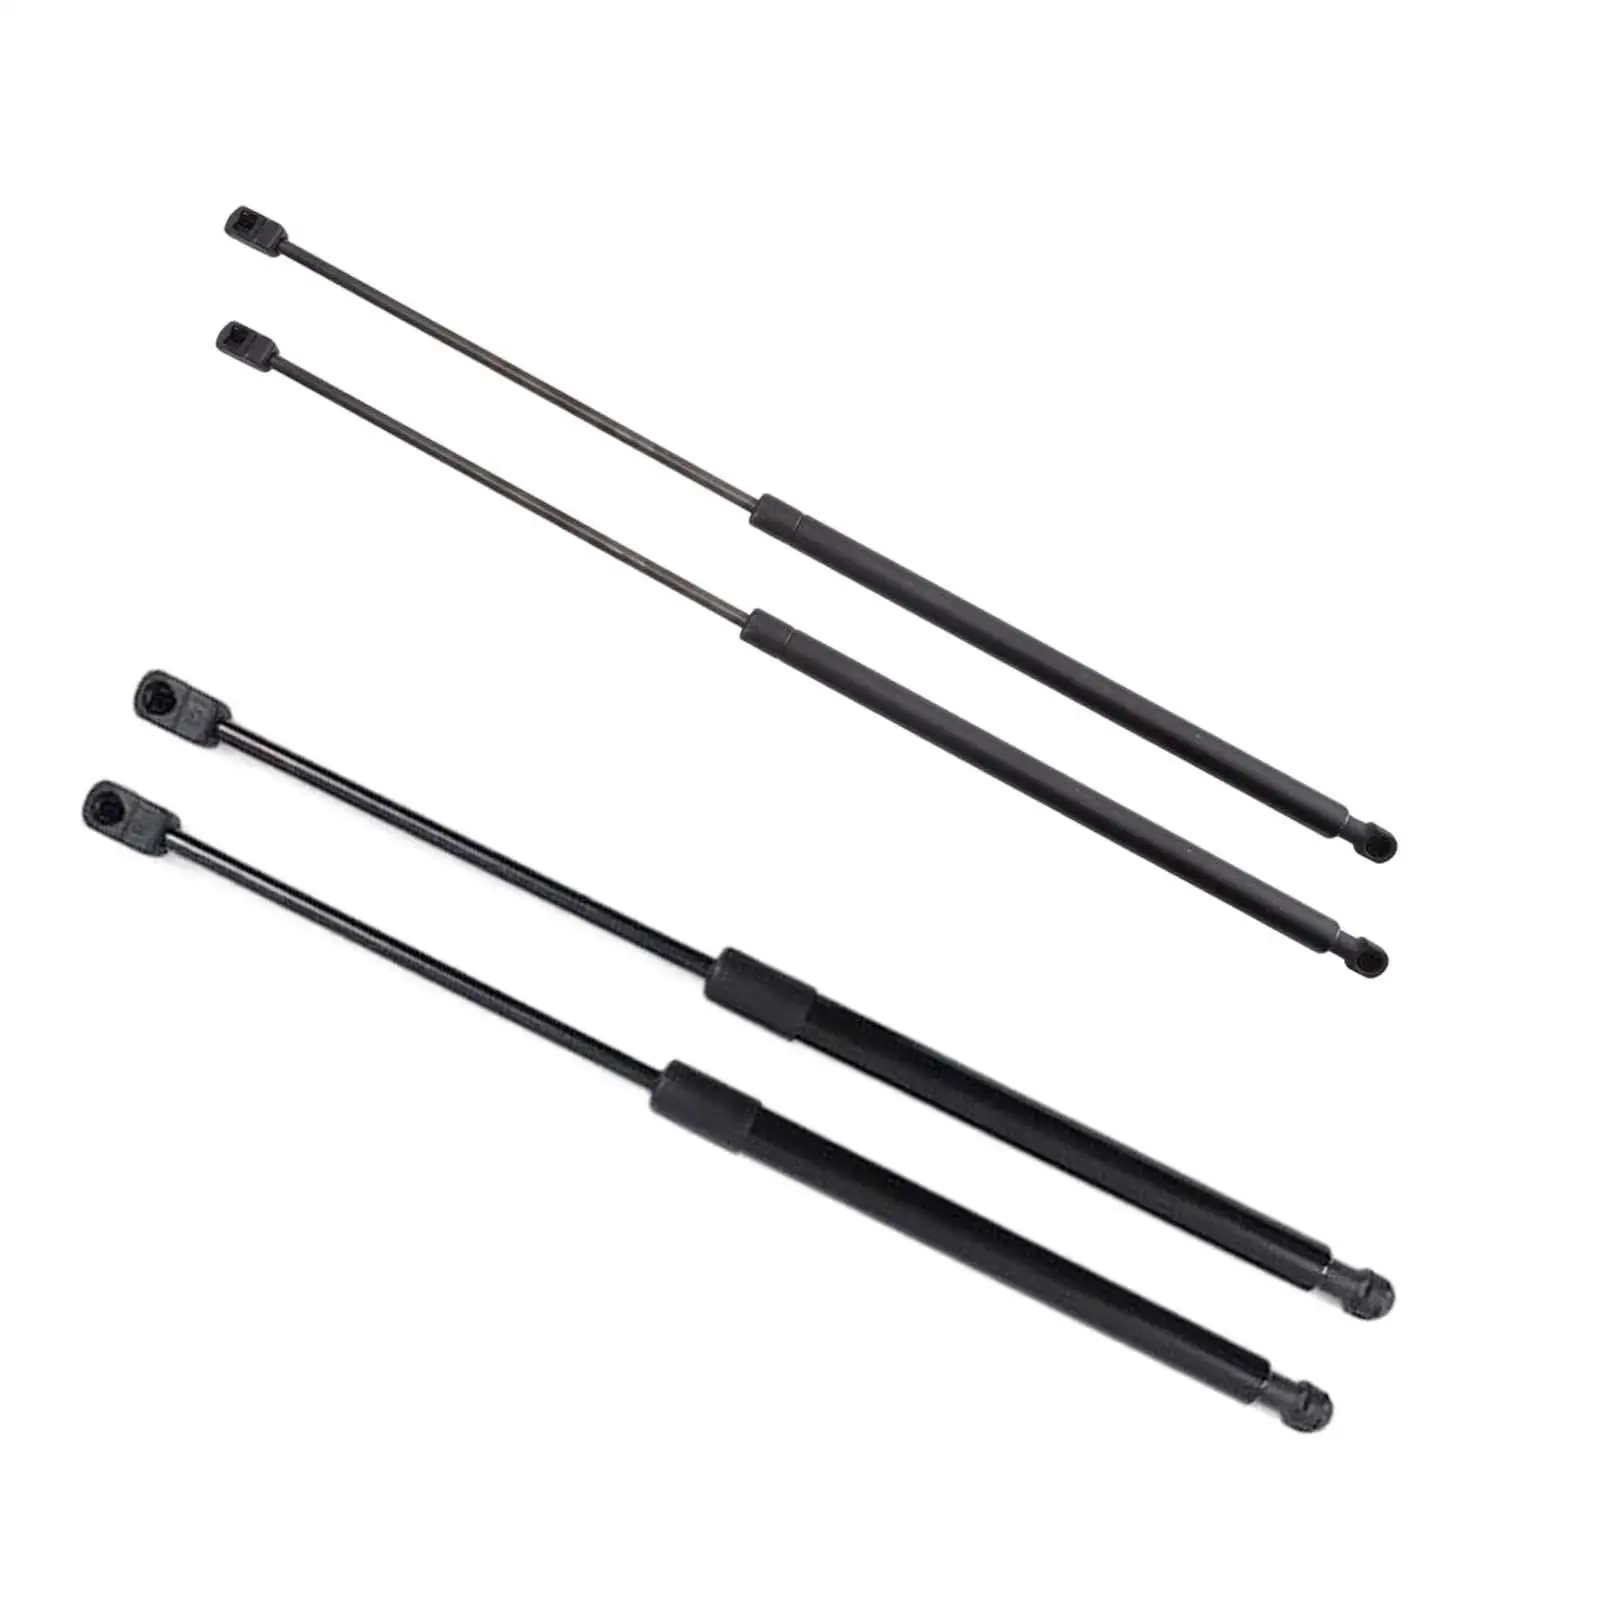 Professional Front Bonnet Struts Durable 25inch Vehicle Hood Lift Support Shocks Holder for Byd Atto 3 Replaces Accessory